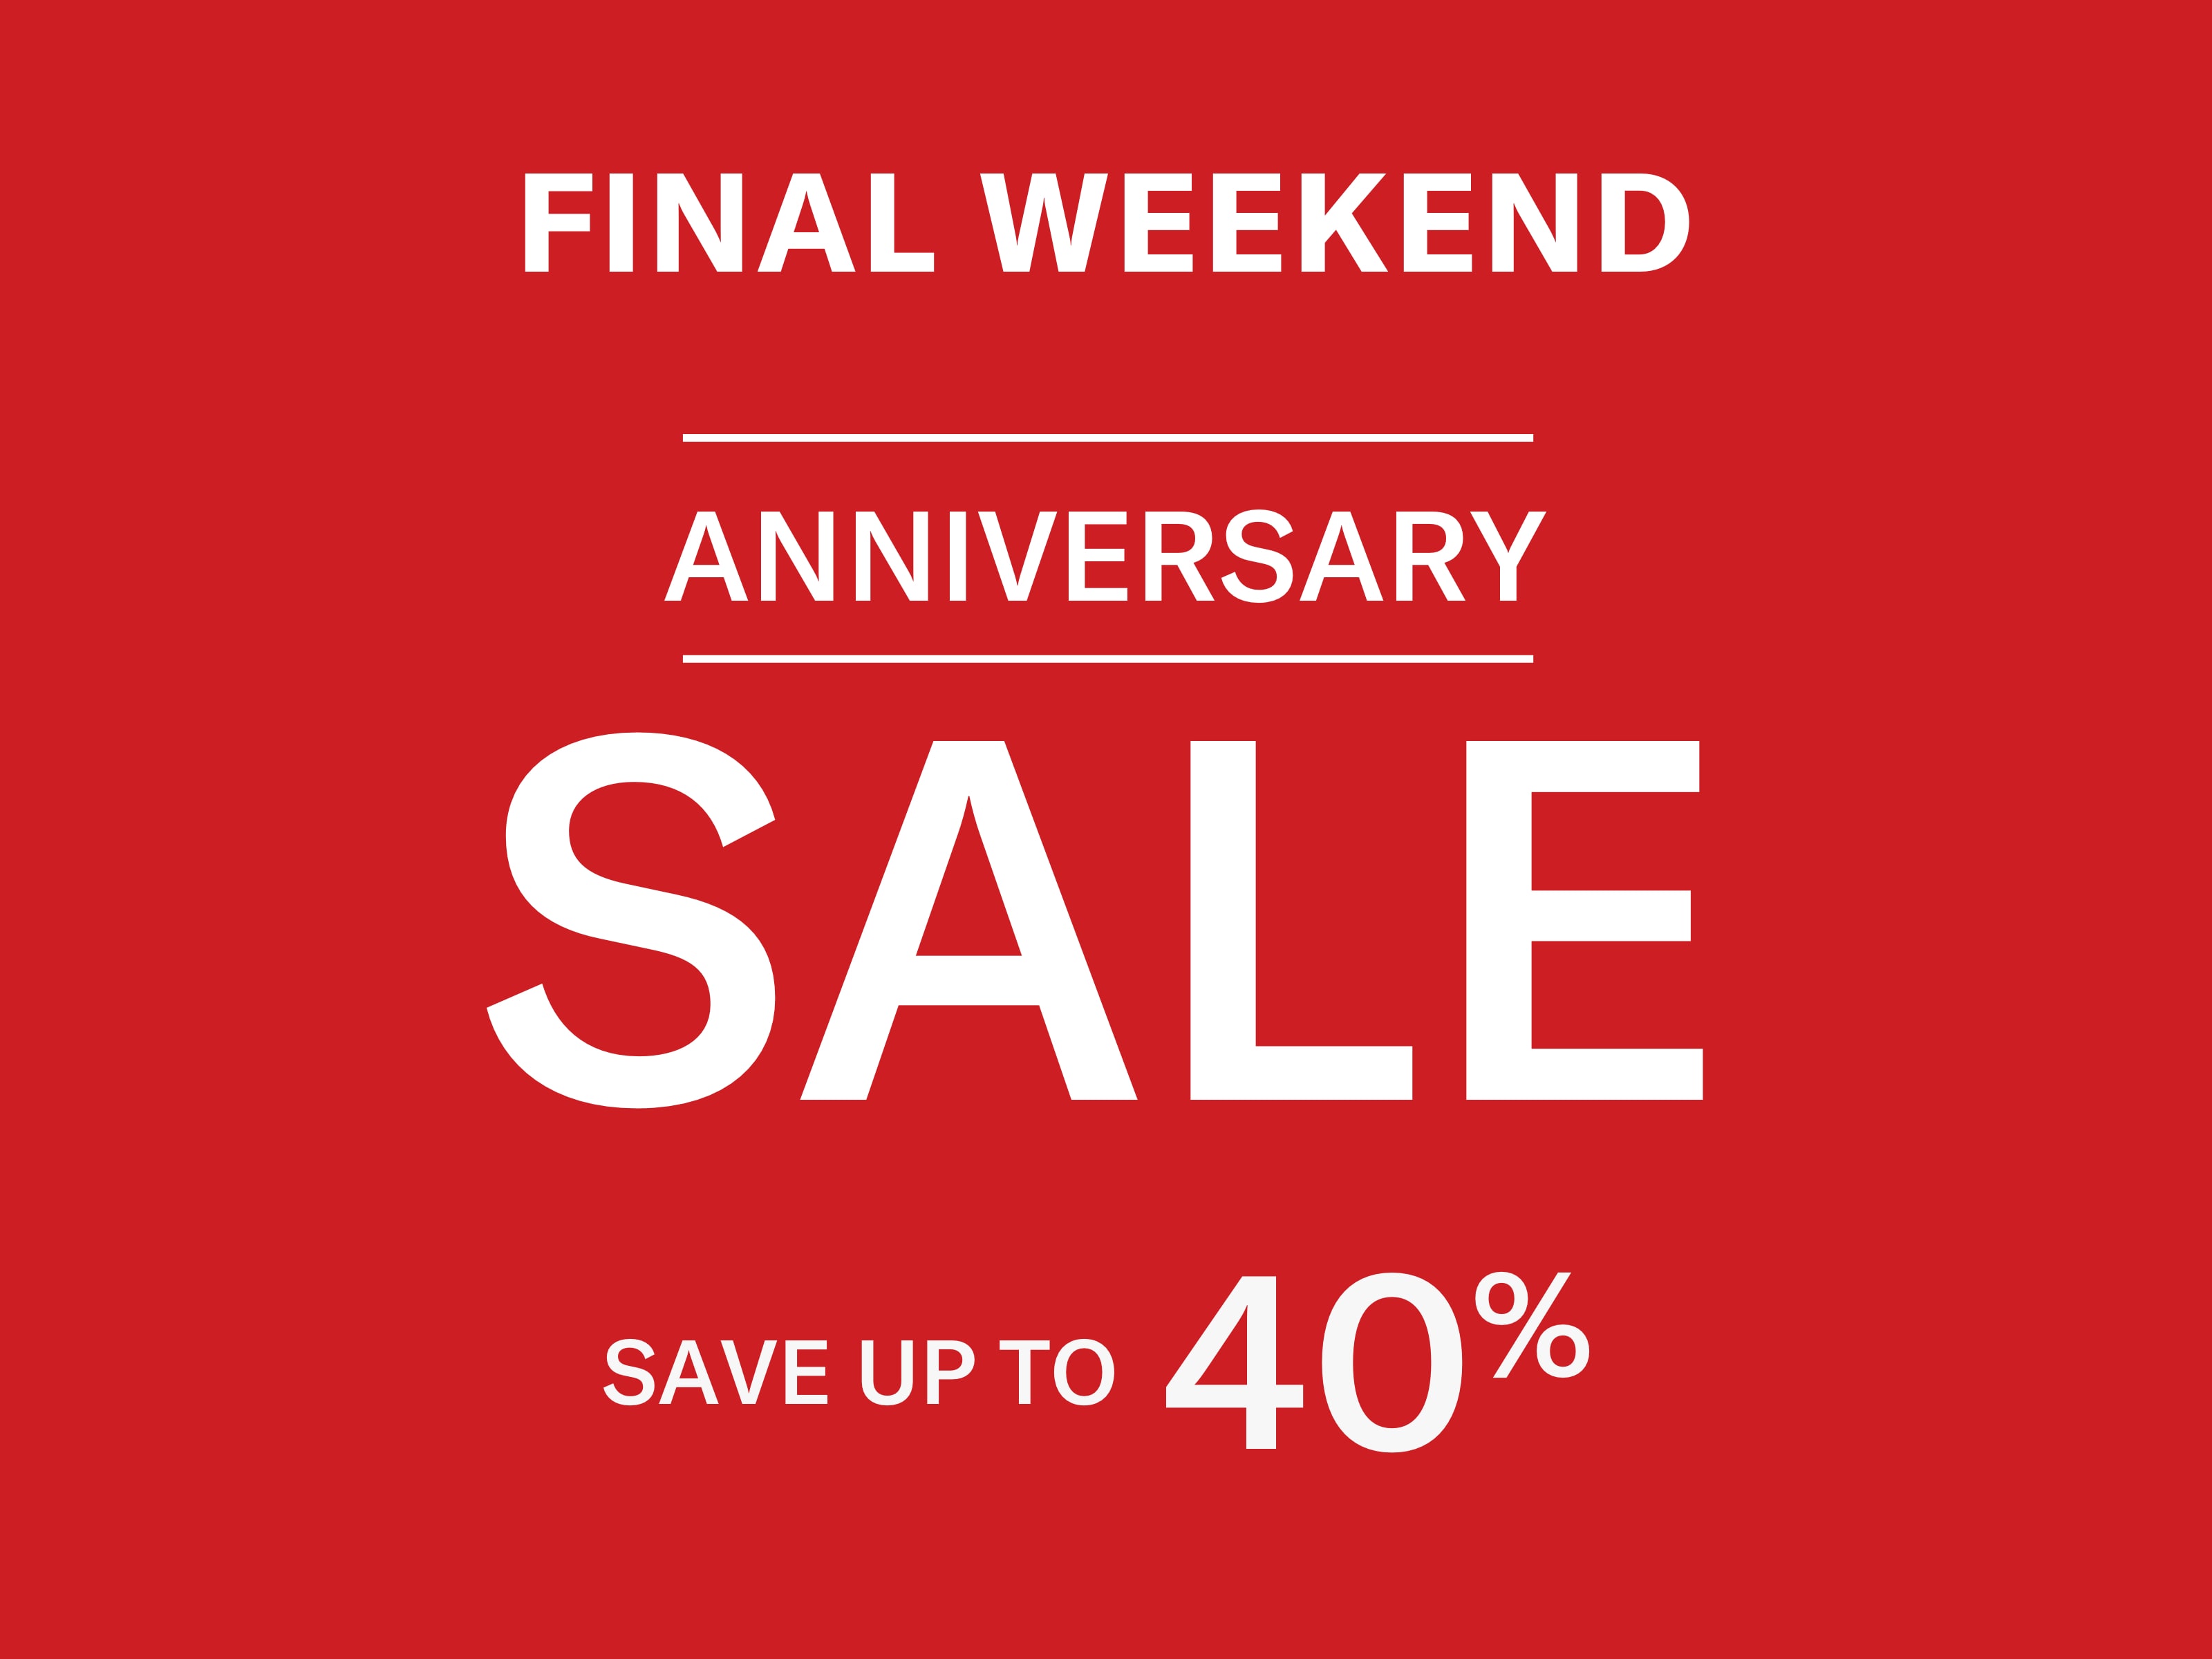 Final Weekend Of Our Biggest Sale of the Season | Save up to 40% | Anniversary Sale